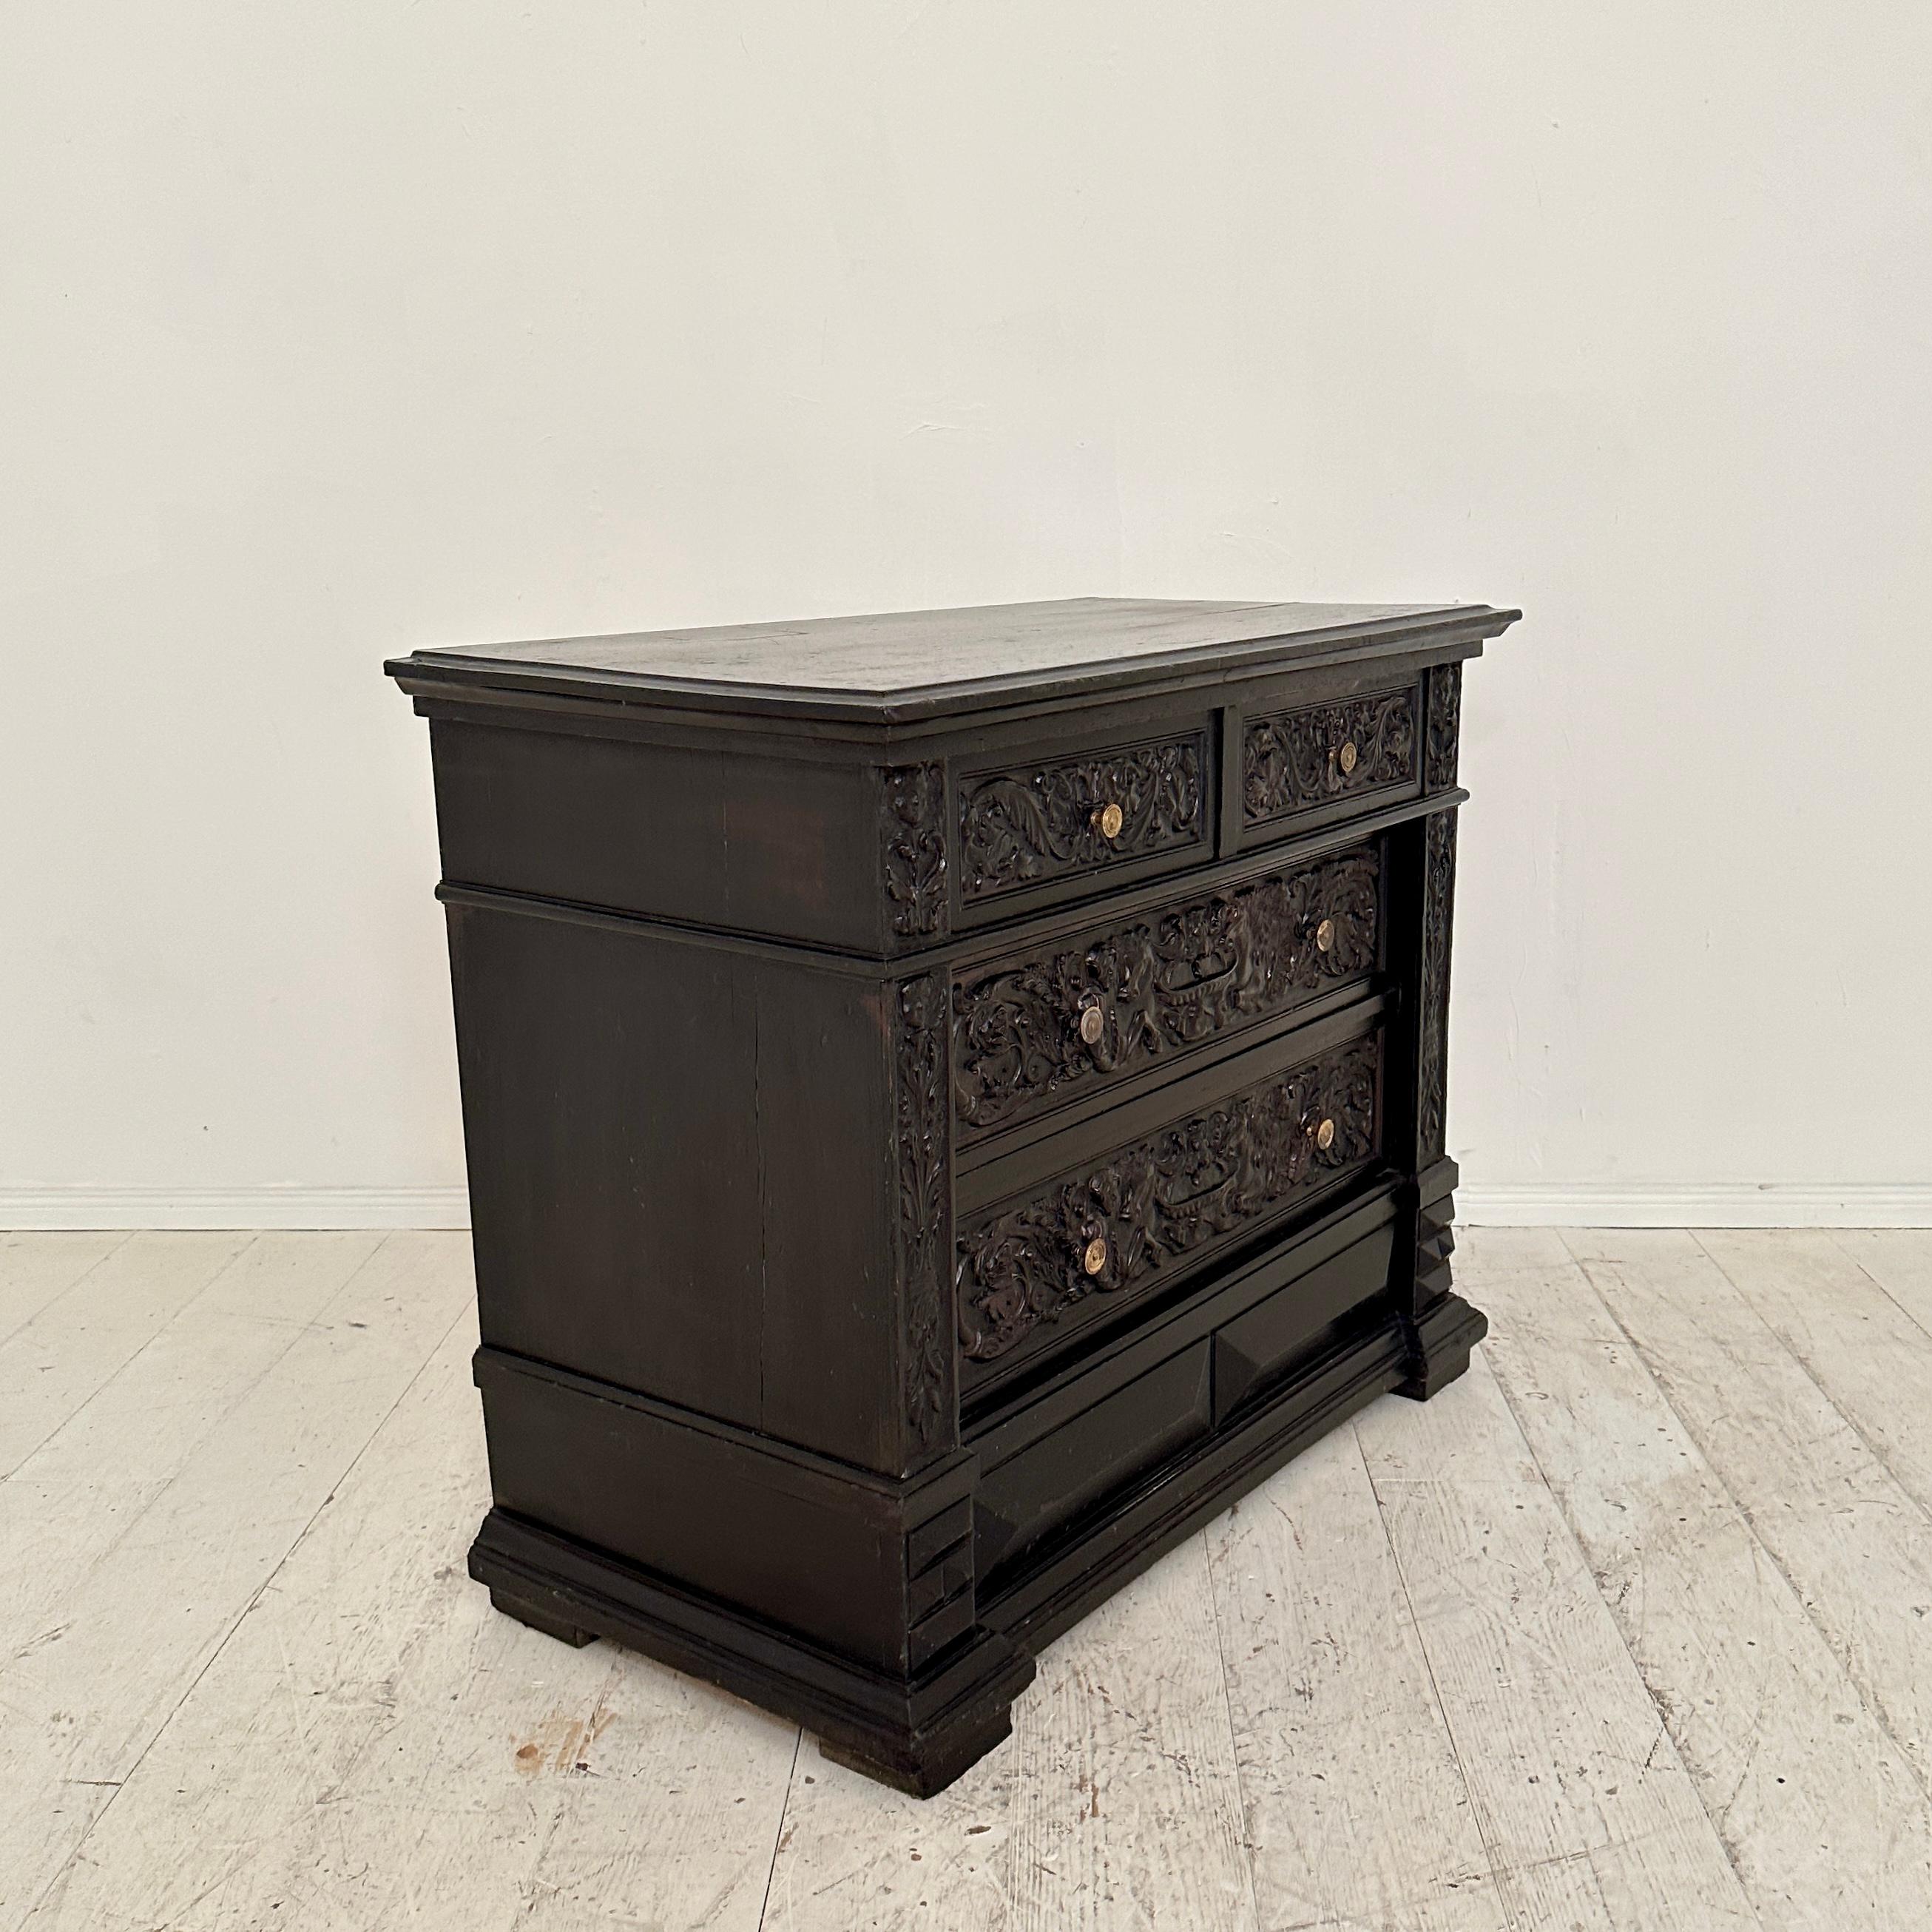 19th Century German Renaissance-Style Chest of Drawers in Black, around 1880 For Sale 5